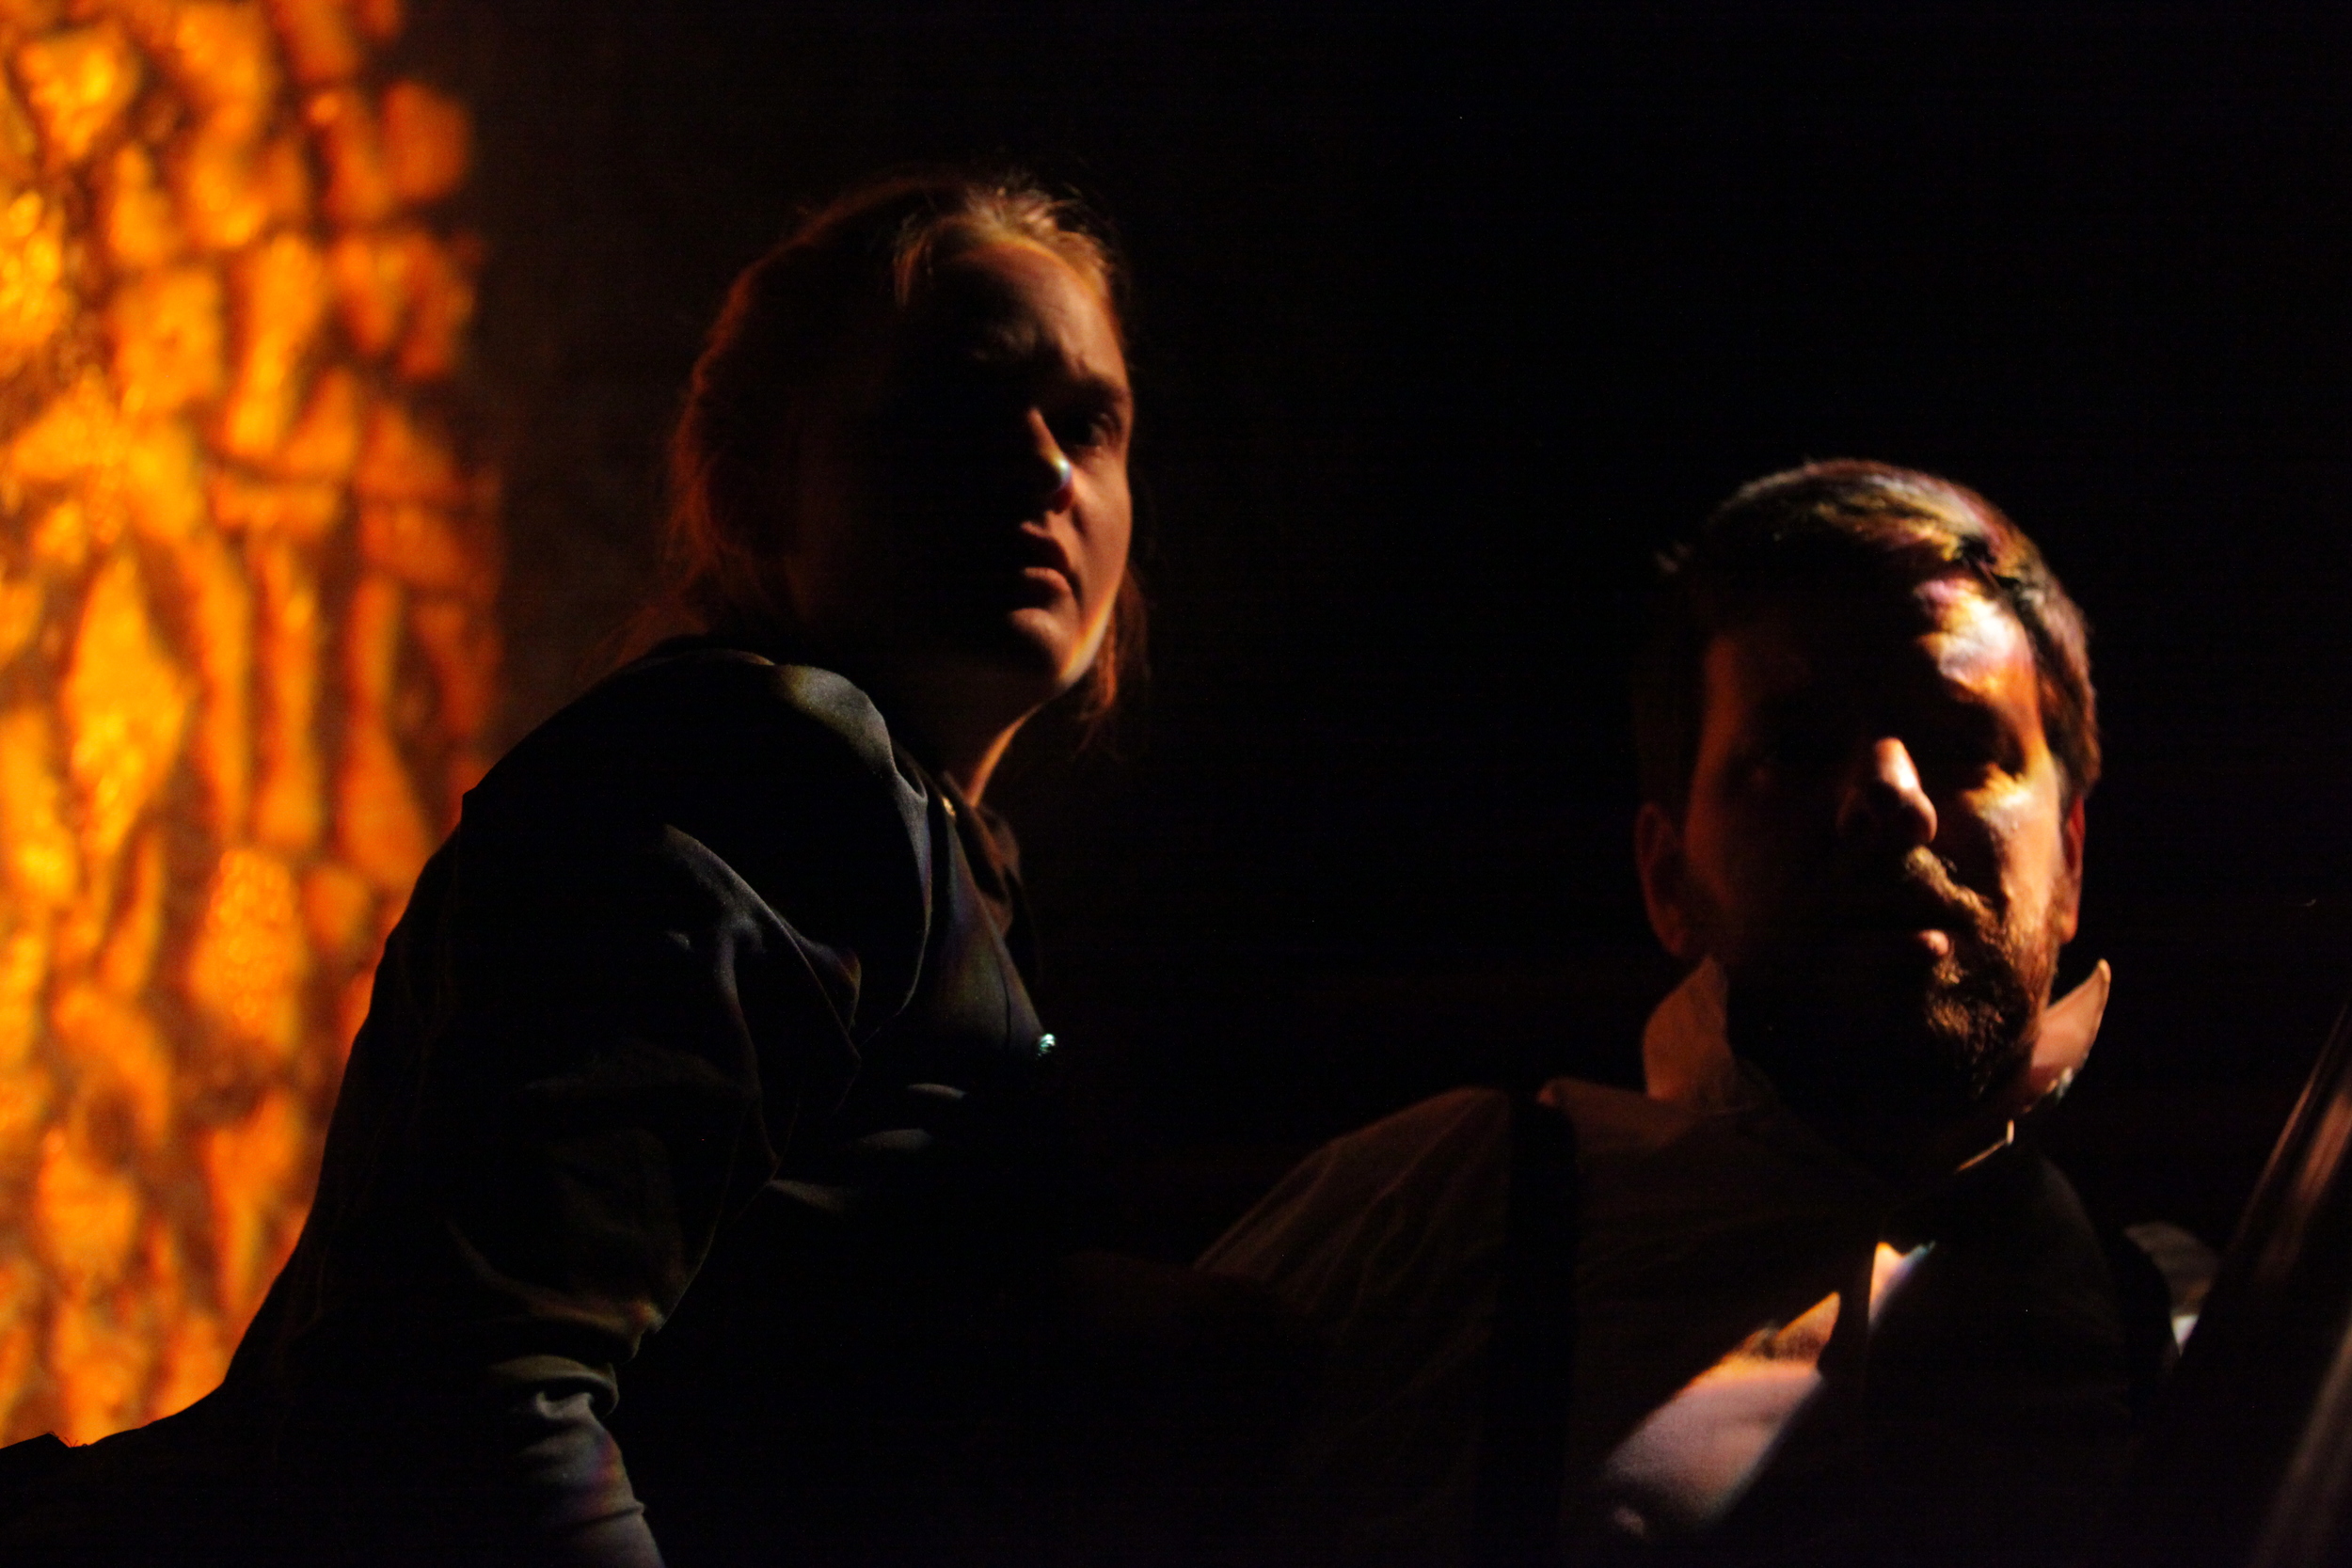 Stephen Libby and Anna Waldron in The Turn of the Screw. Photo by Kyler Taustin.